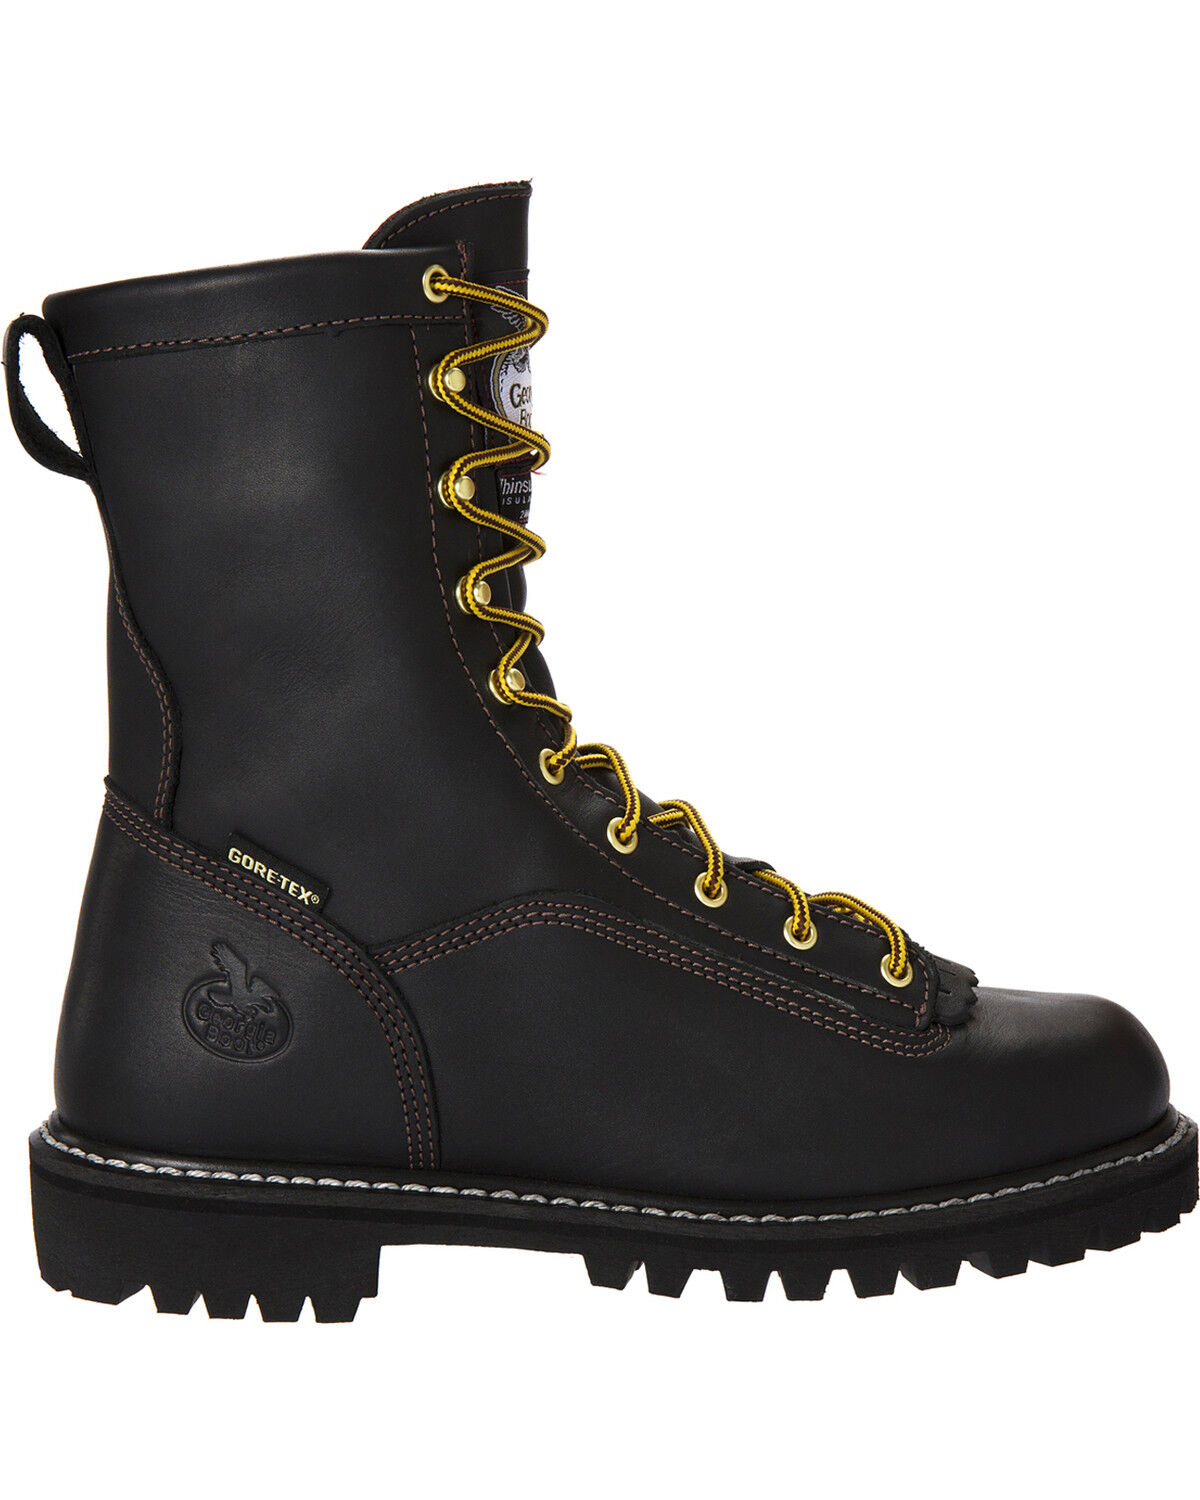 GORE-TEX Insulated Work Boots | Boot Barn